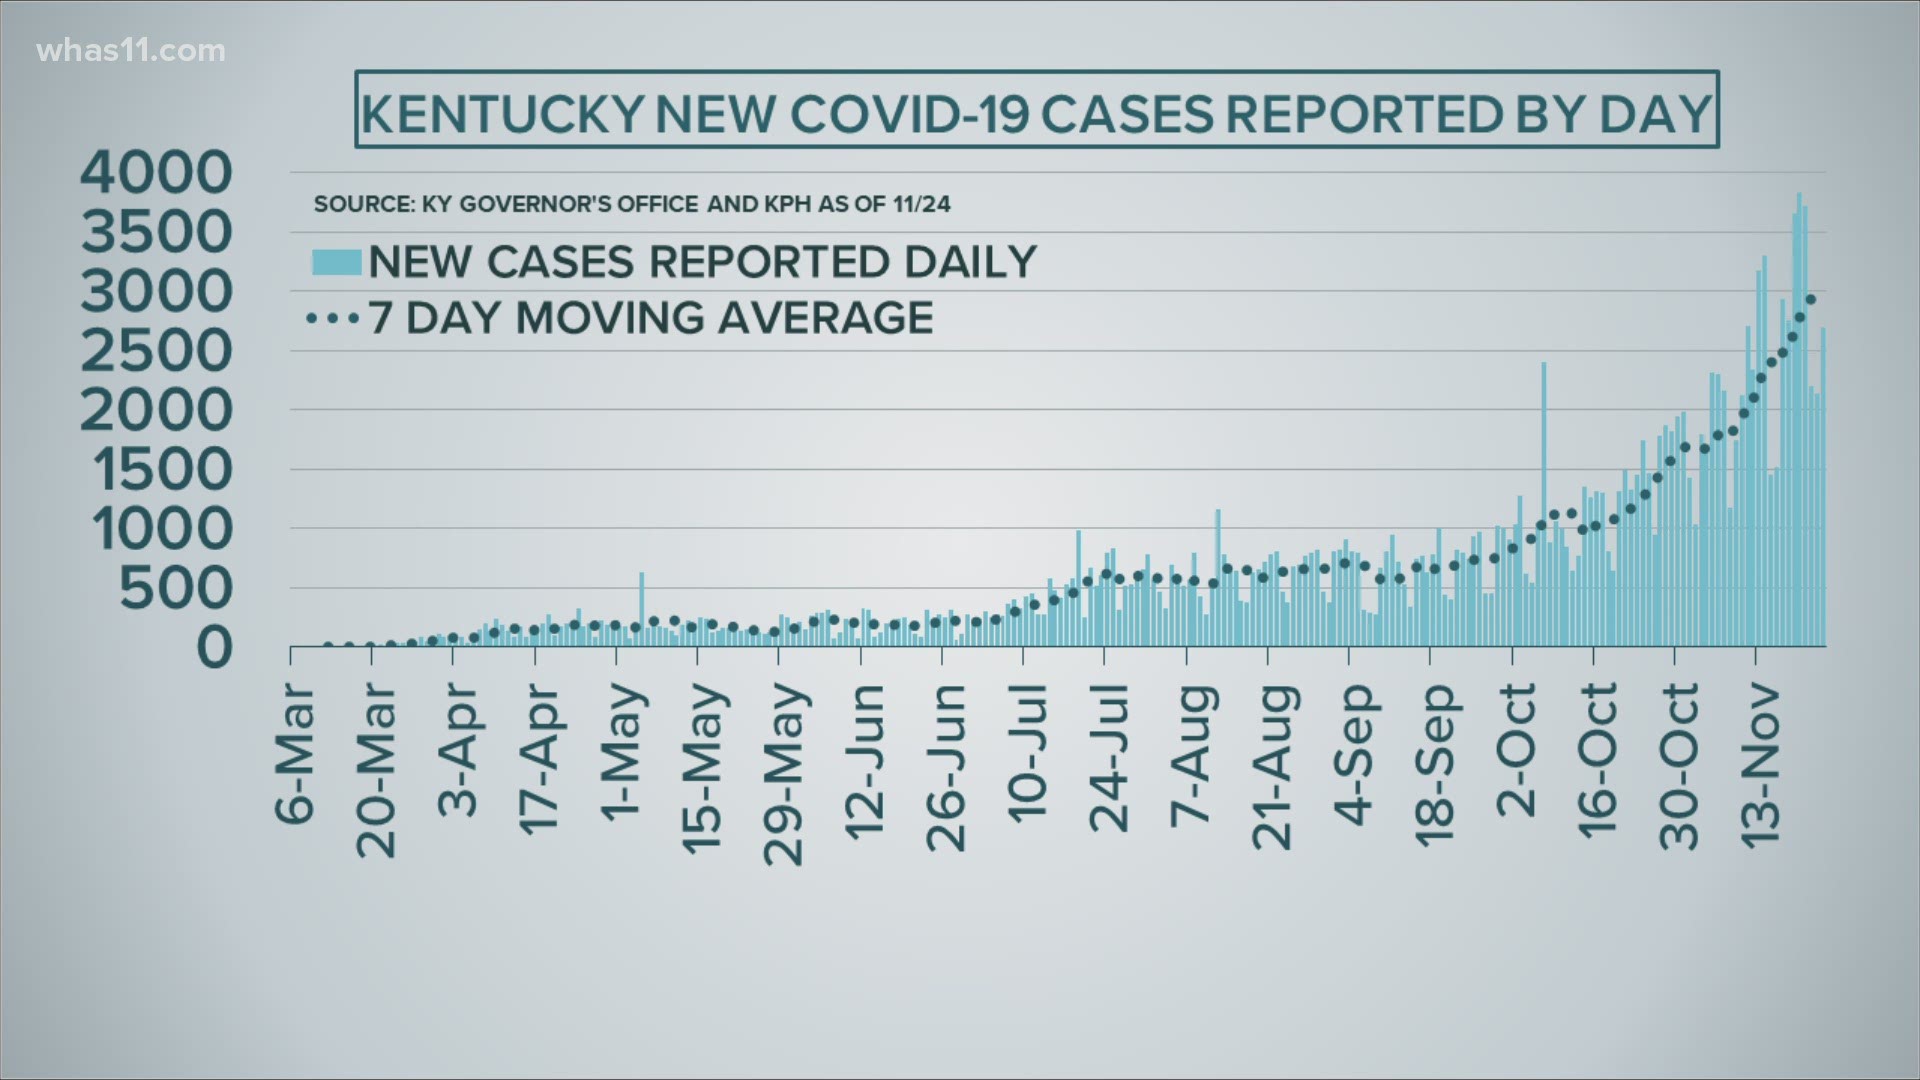 It took more than a month before a total 2,000 Kentuckians were infected. It has been more than a week since officials reported less than 2,000 cases in one day.